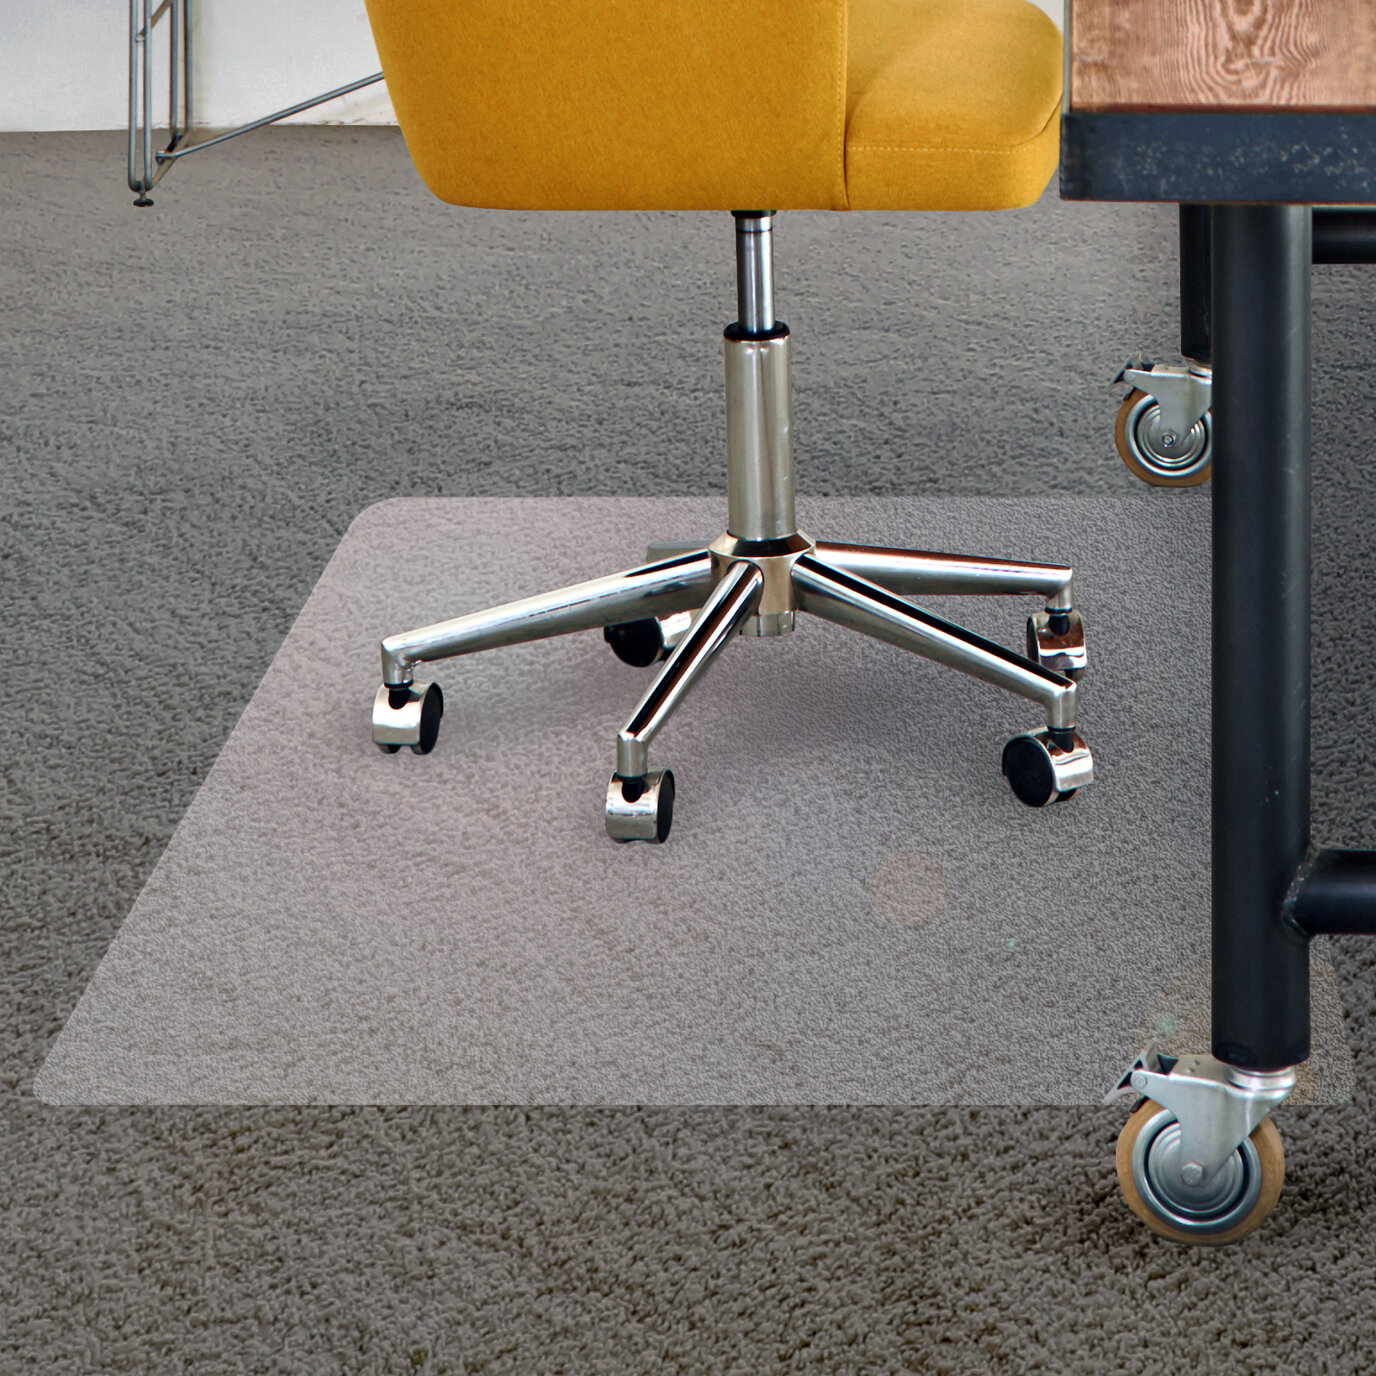 Chair Mat Buyer's Guide  Selecting the Best Chair Mat